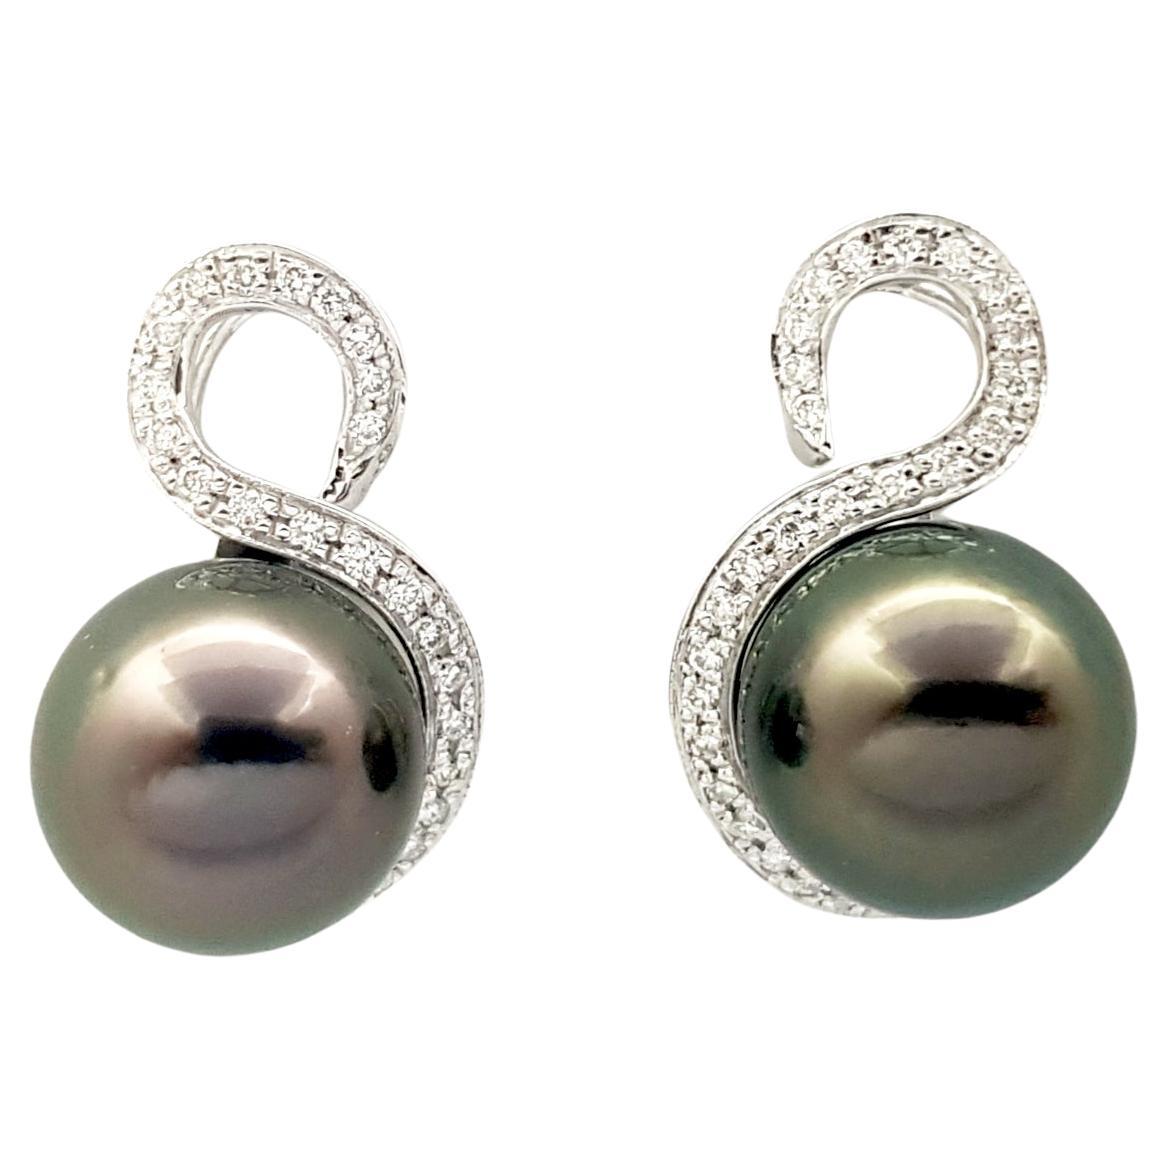 South Sea Pearl with Diamond Earrings set in 18K White Gold Settings